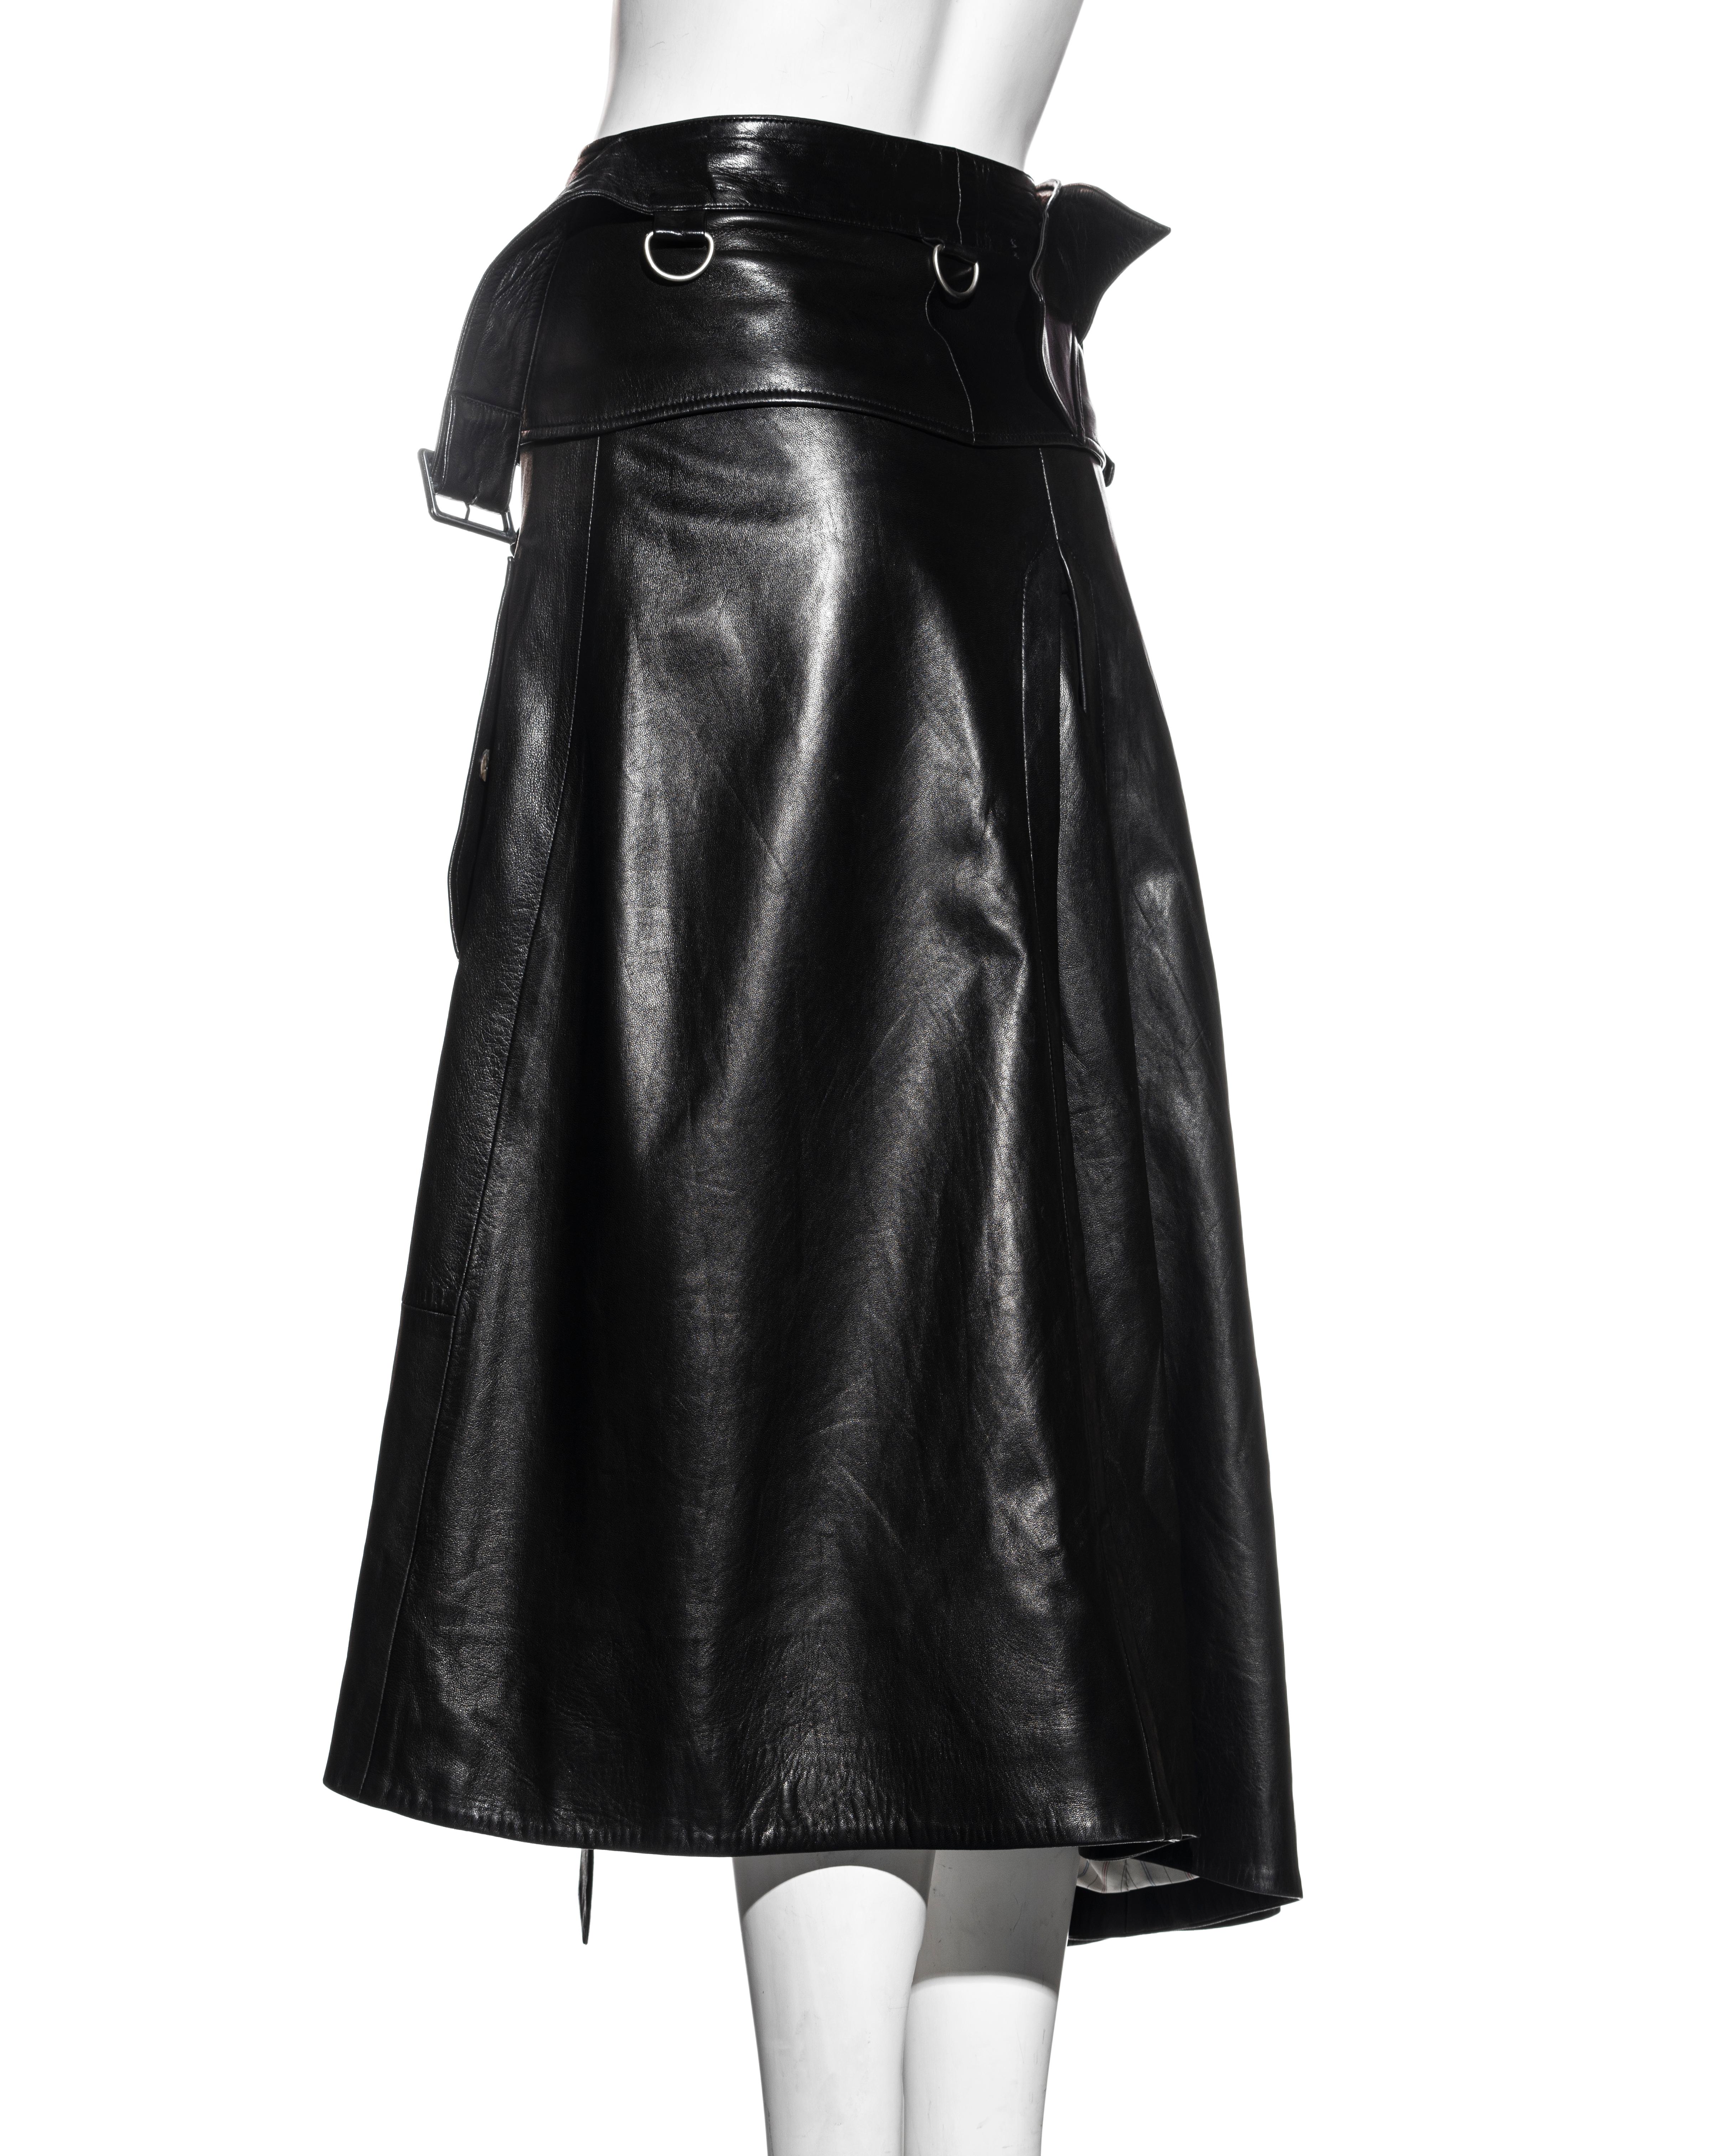 John Galliano black leather deconstructed wrap skirt, c. 2002 For Sale 3